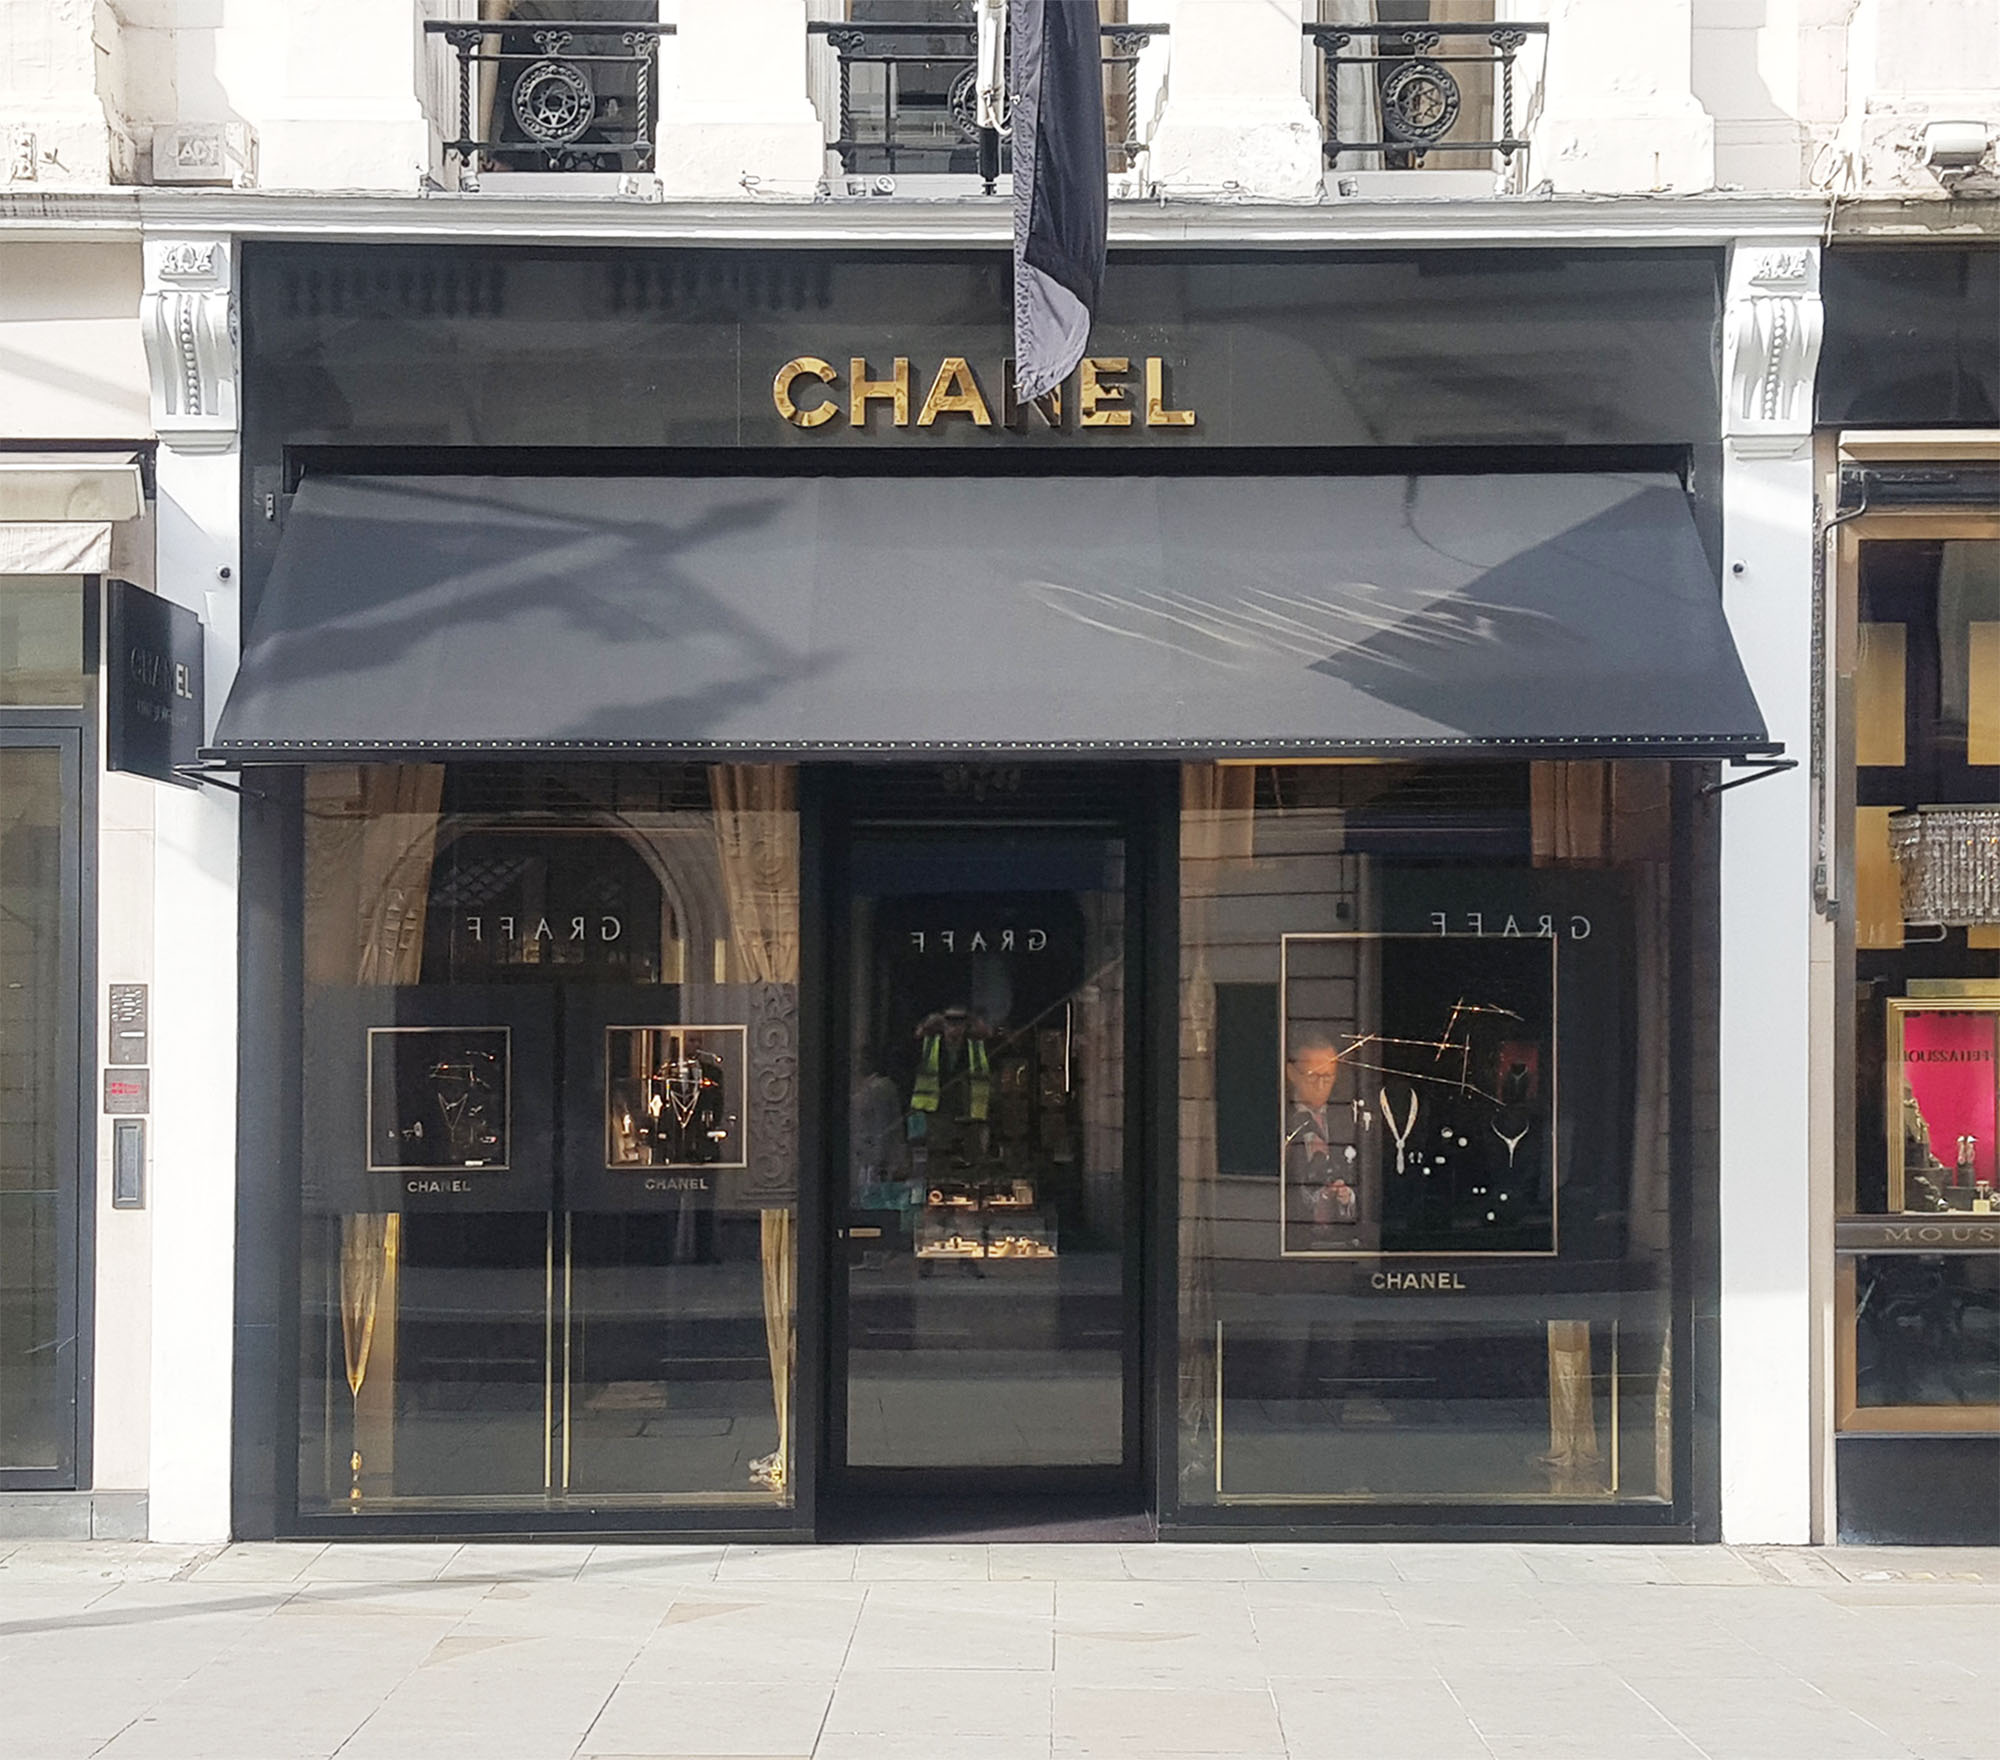 Victorian awning Chanel